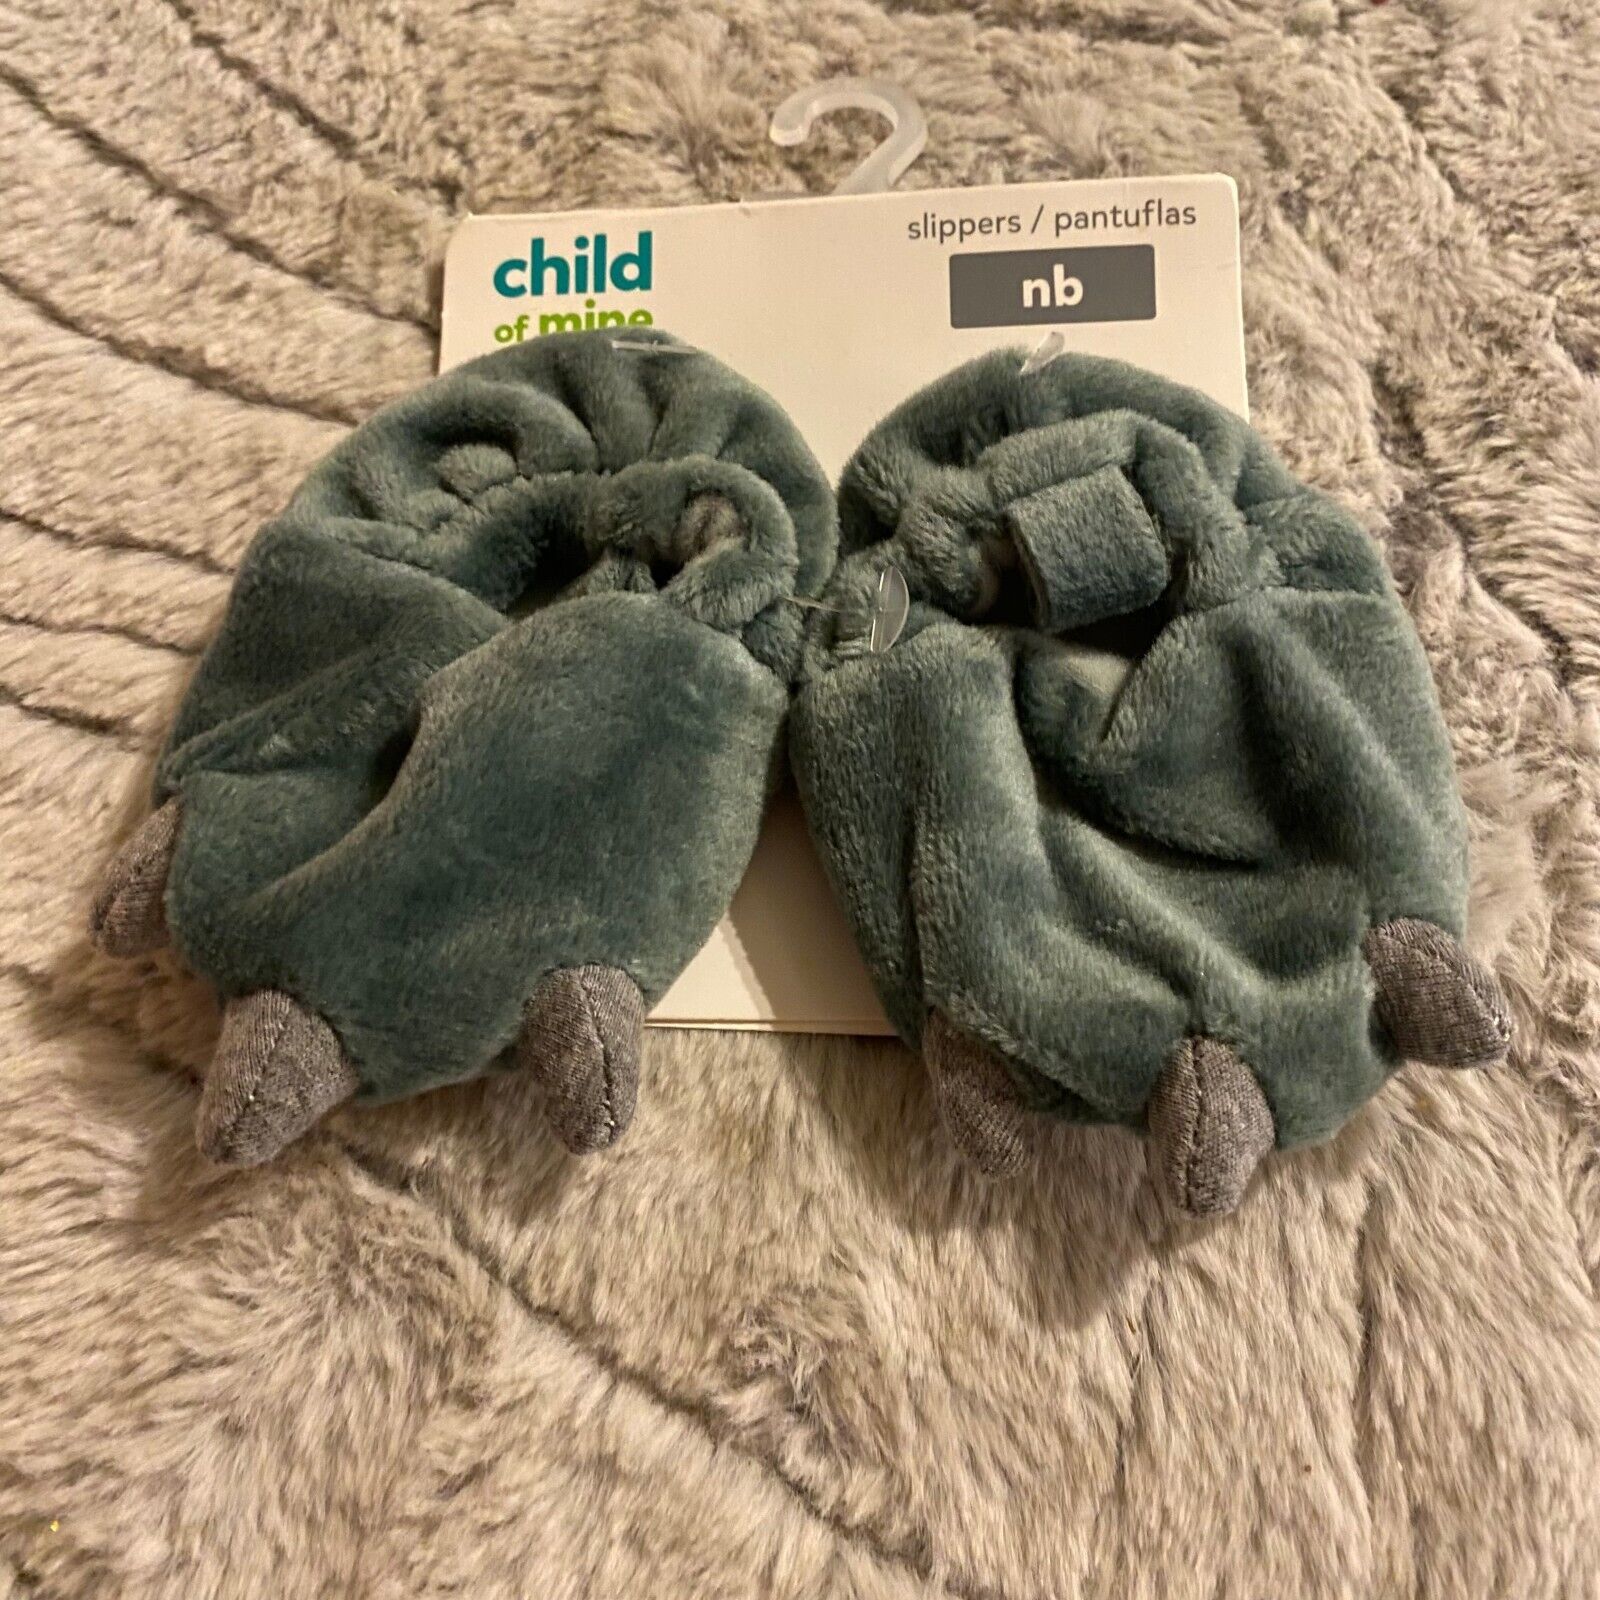 Child of Mine NB Dino Slippers NEW - $7.69